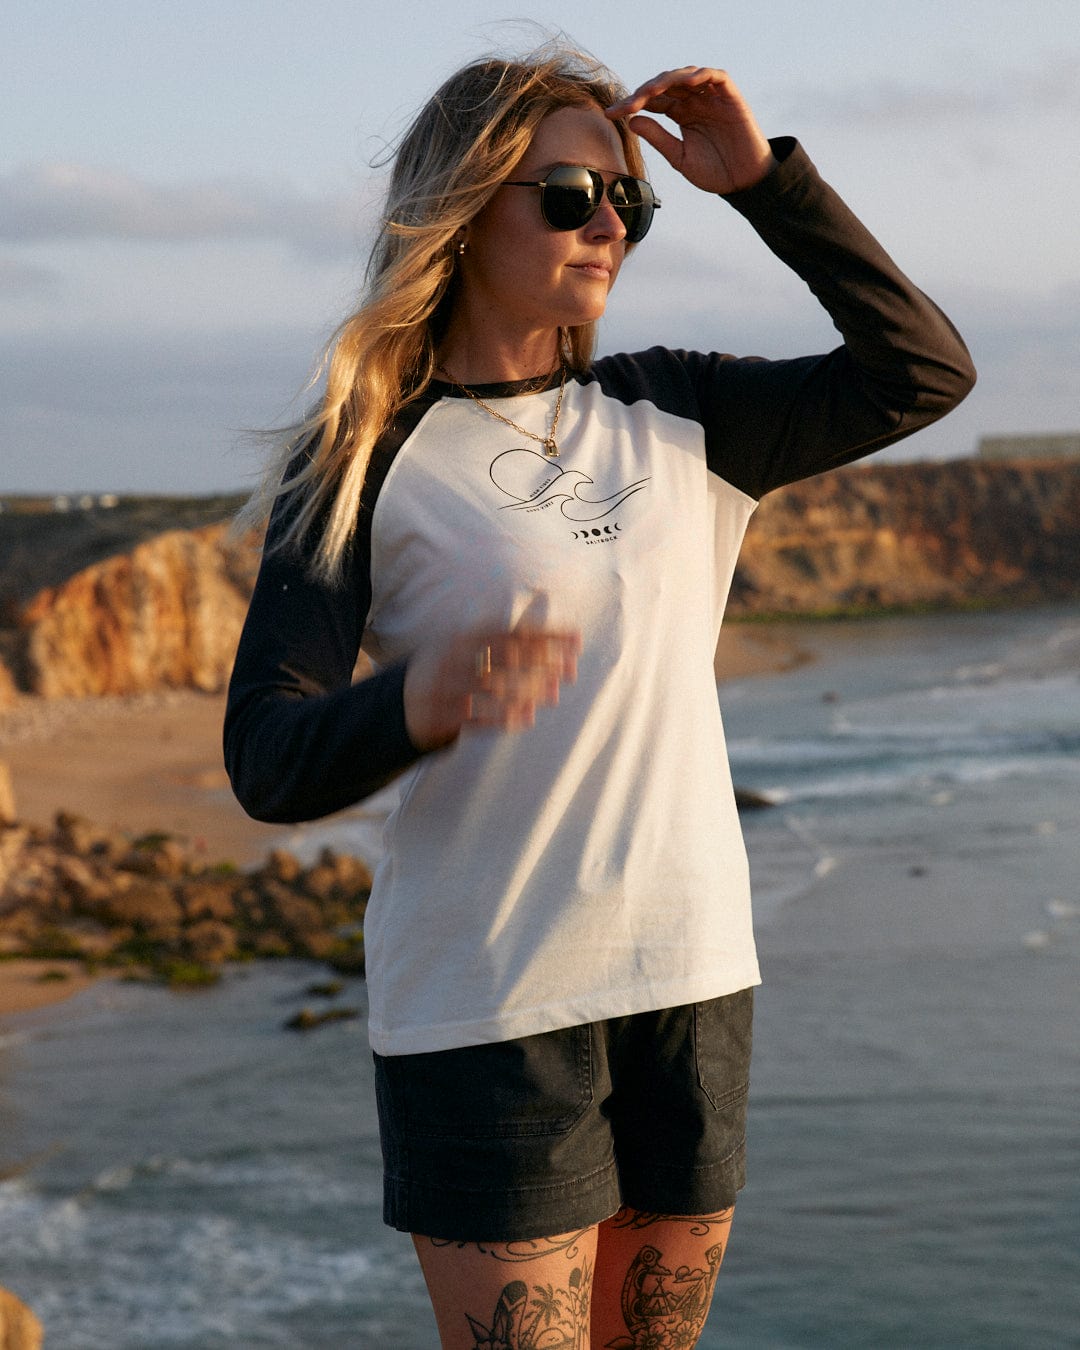 A woman with graphic tattoos standing on a cliff overlooking the ocean wearing the Saltrock High Tides - Womens Raglan Long Sleeve T-Shirt in White.